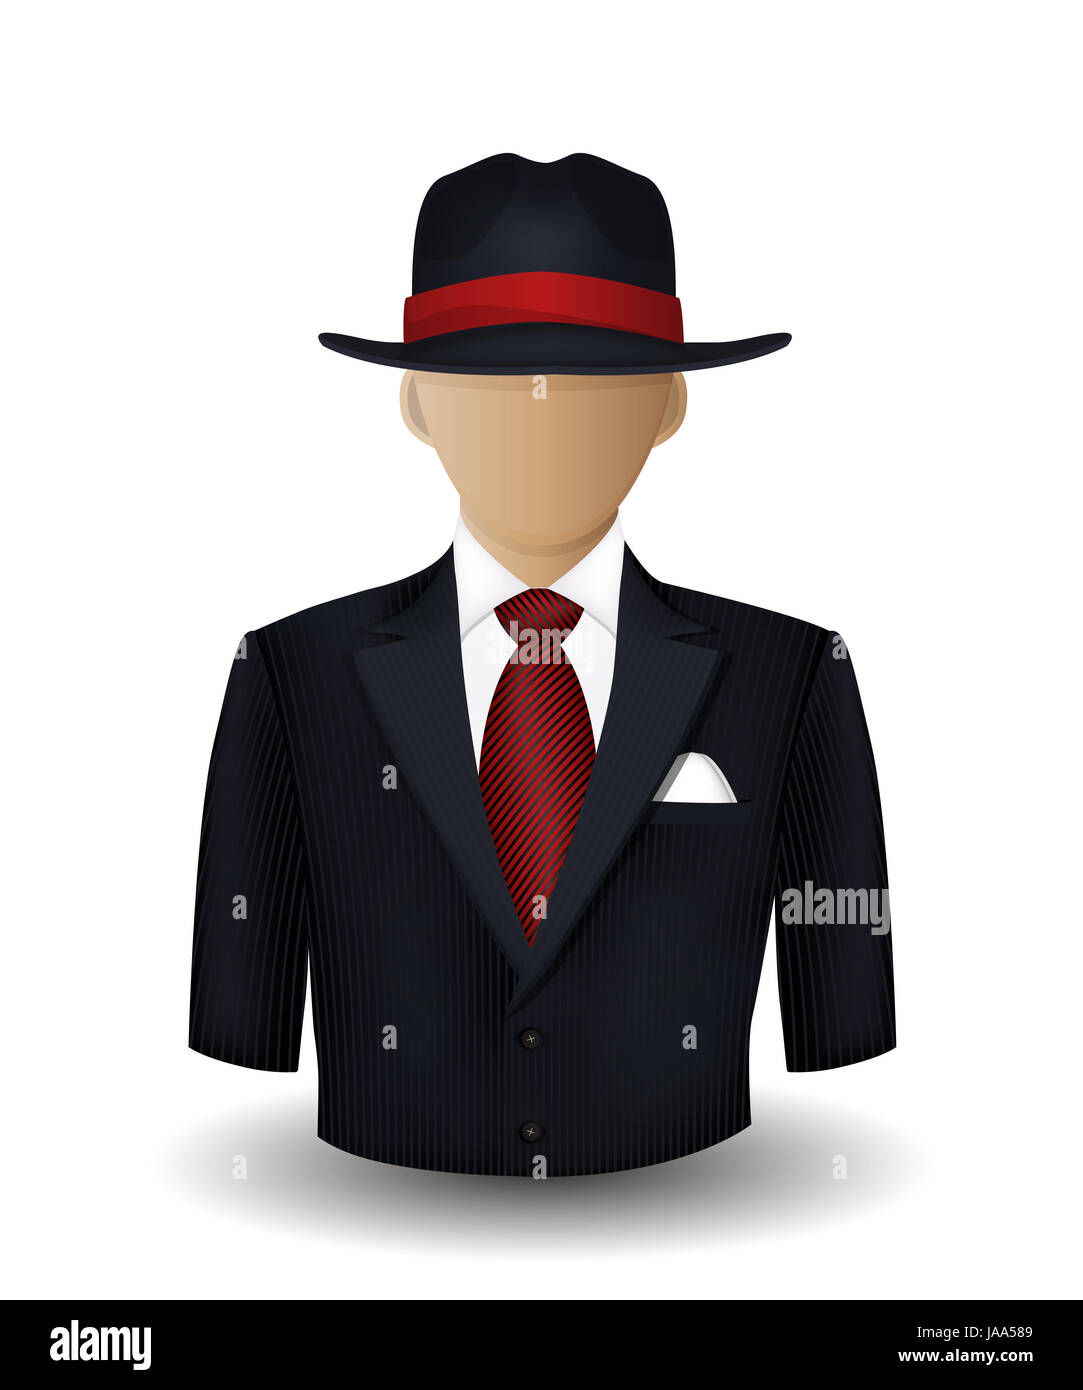 private, object, emblem, graphic, hat, human, human being, look, glancing, see, Stock Photo